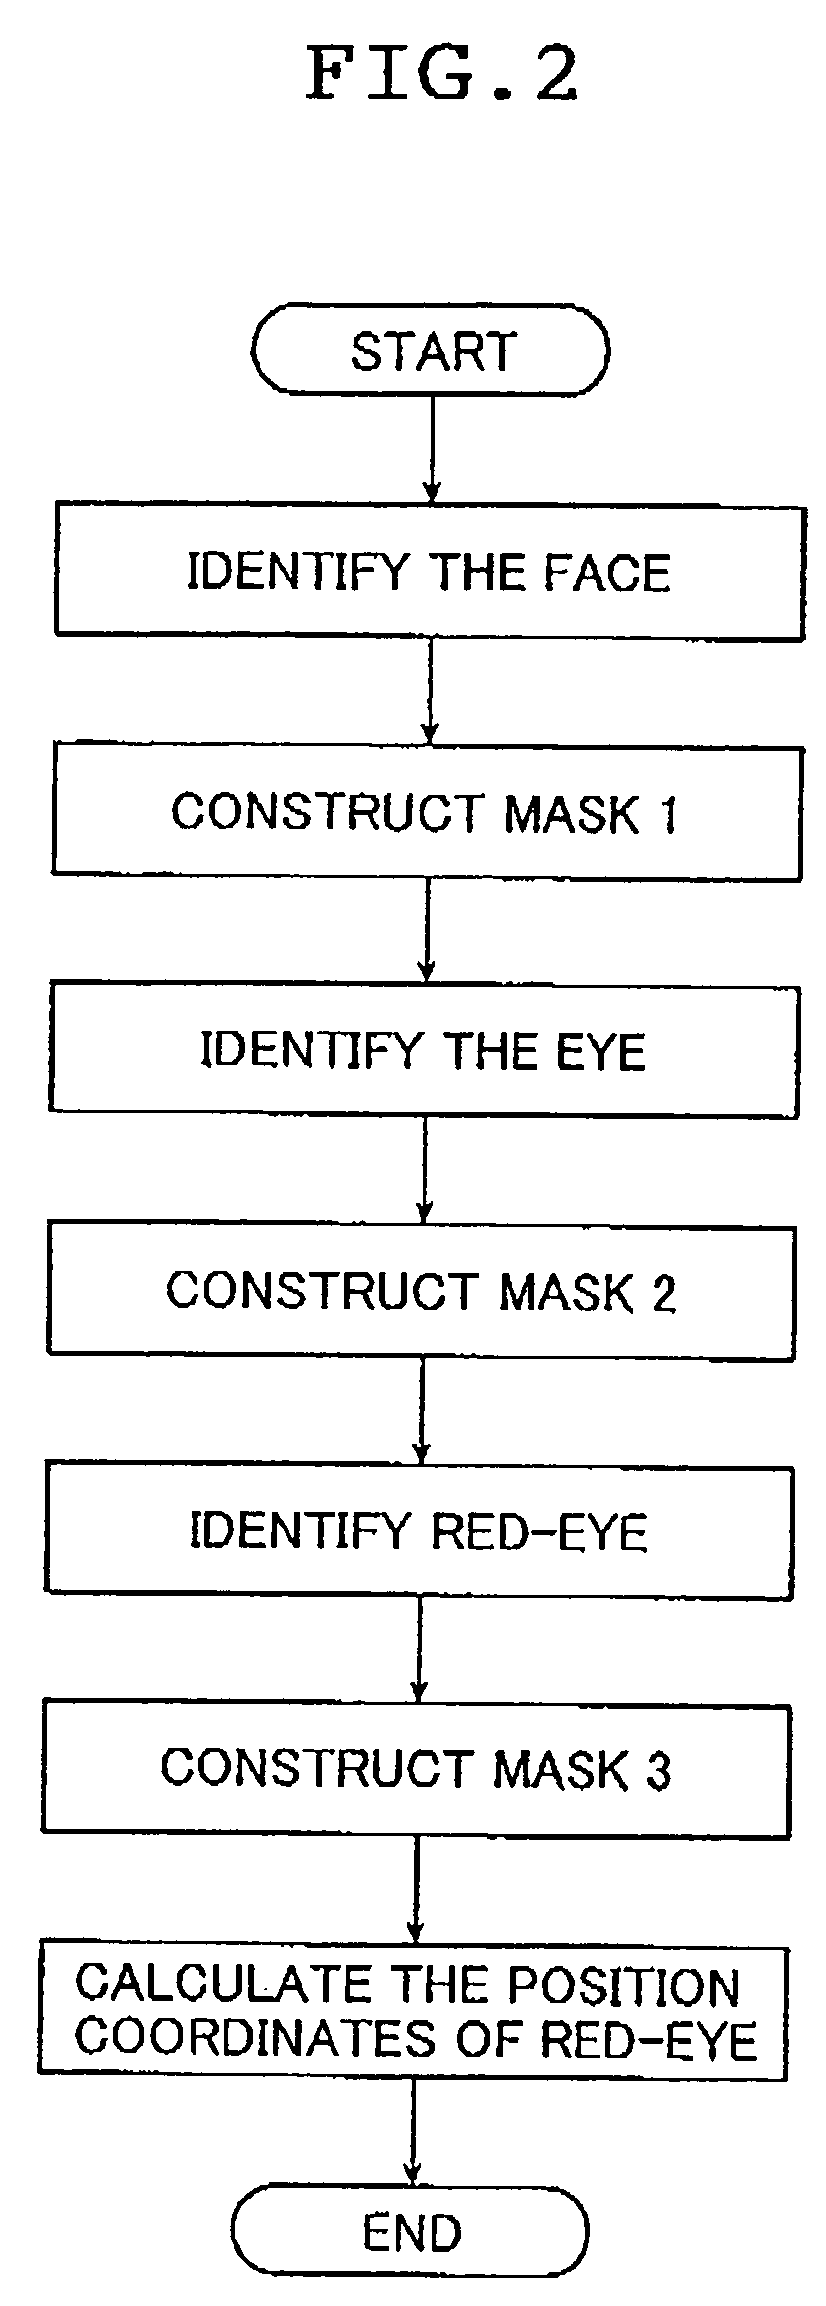 Image processing apparatus and method, red-eye detection method, as well as programs for executing the image processing method and the red-eye detection method